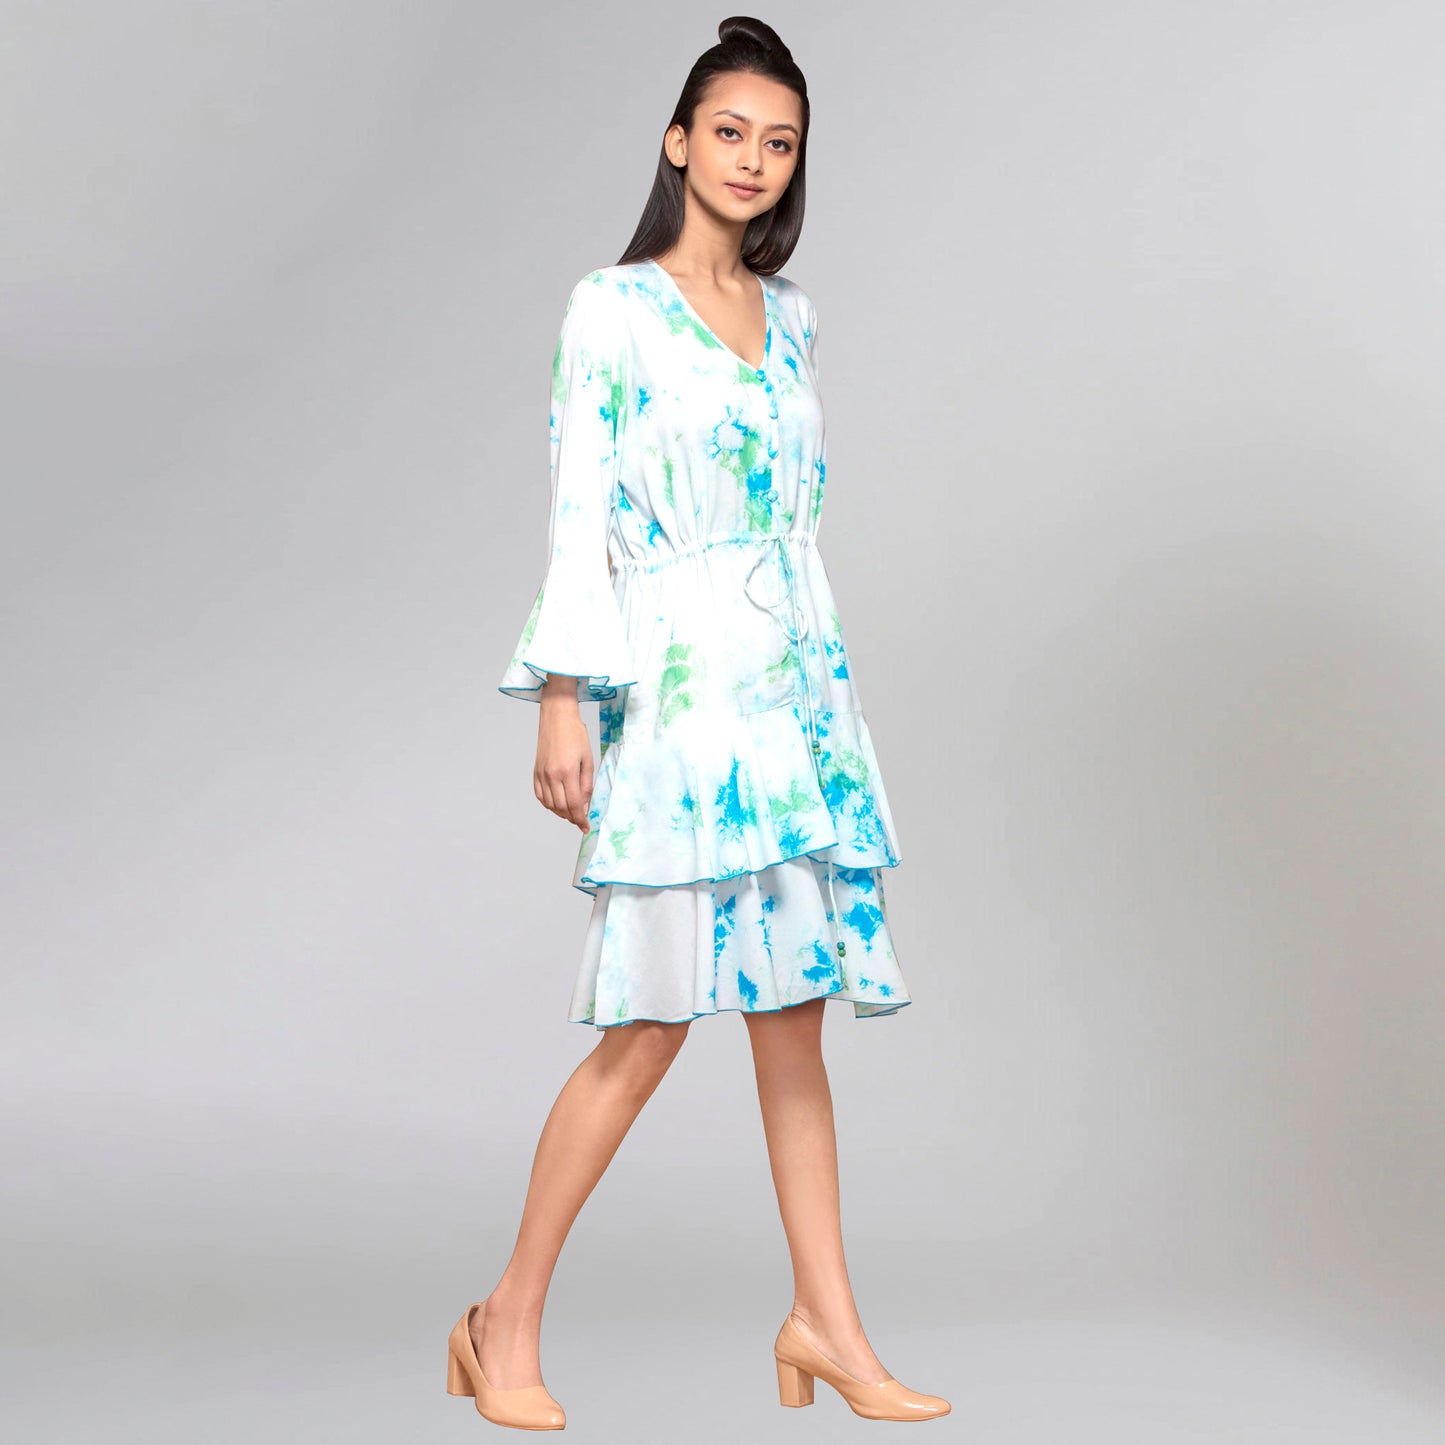 Blue and Green Tie-Dye Frill Dress